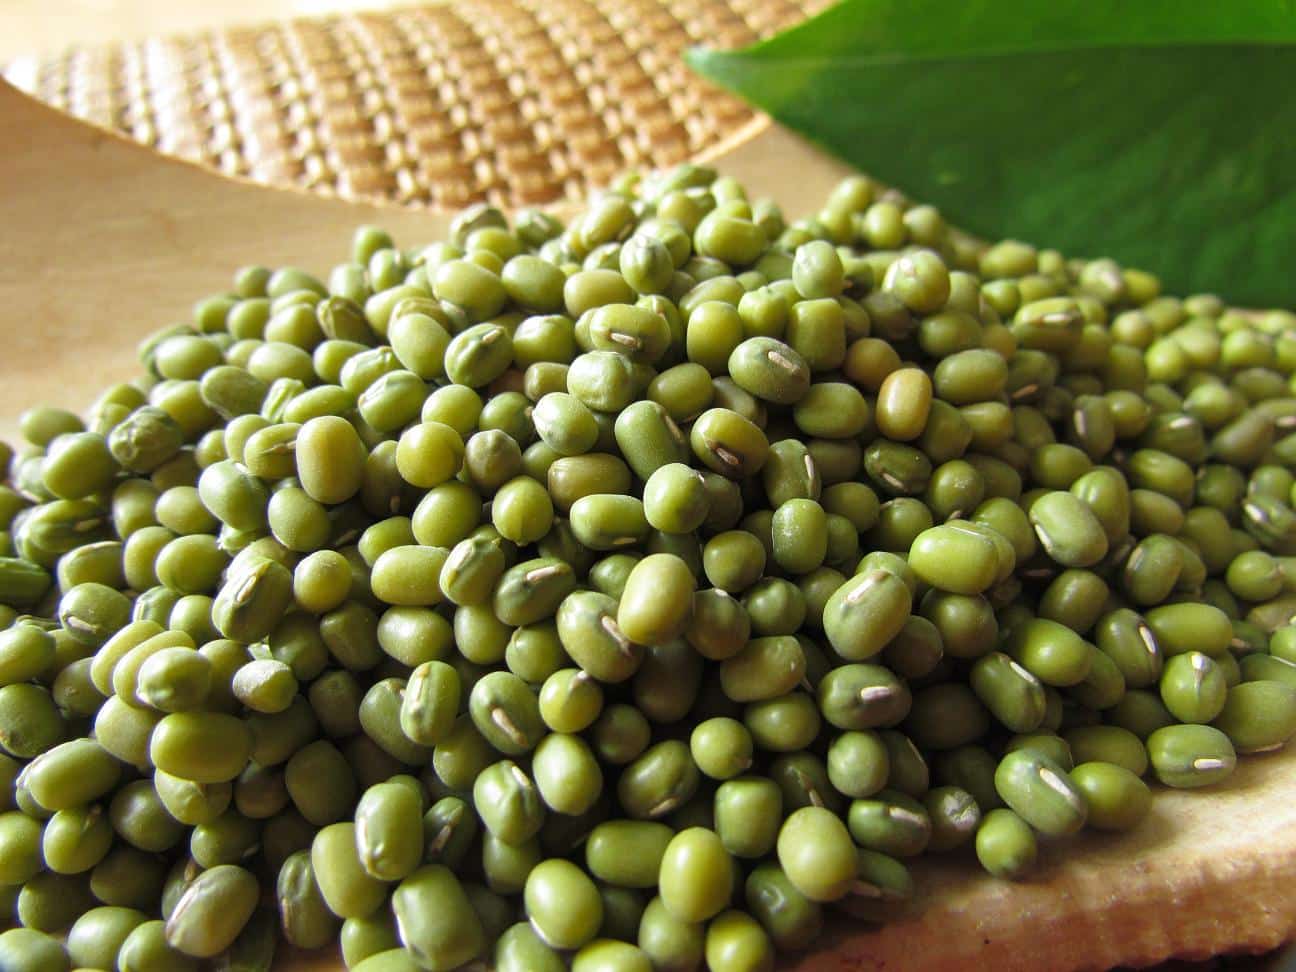 Mung Bean Protein powder,pea proteinphycocyanin protein,www.et-chem.com,et-chem.com,etchem,et pharchem,plant protein,vegan protein,functional peptide, herbal extracts, natural ingredient,botanical ingredient,company, supplier,distributor,wholesale,manufacturer,producer,best,unique,innovative,scfe co2,uk,usa,Canada,Europe,france,germany,Italy,spain,brazil,mexico,uae,middle east,asia,china,solvent free,food grade,trending,health,food,beauty,cosmetics,natural,love,recipes,recipe